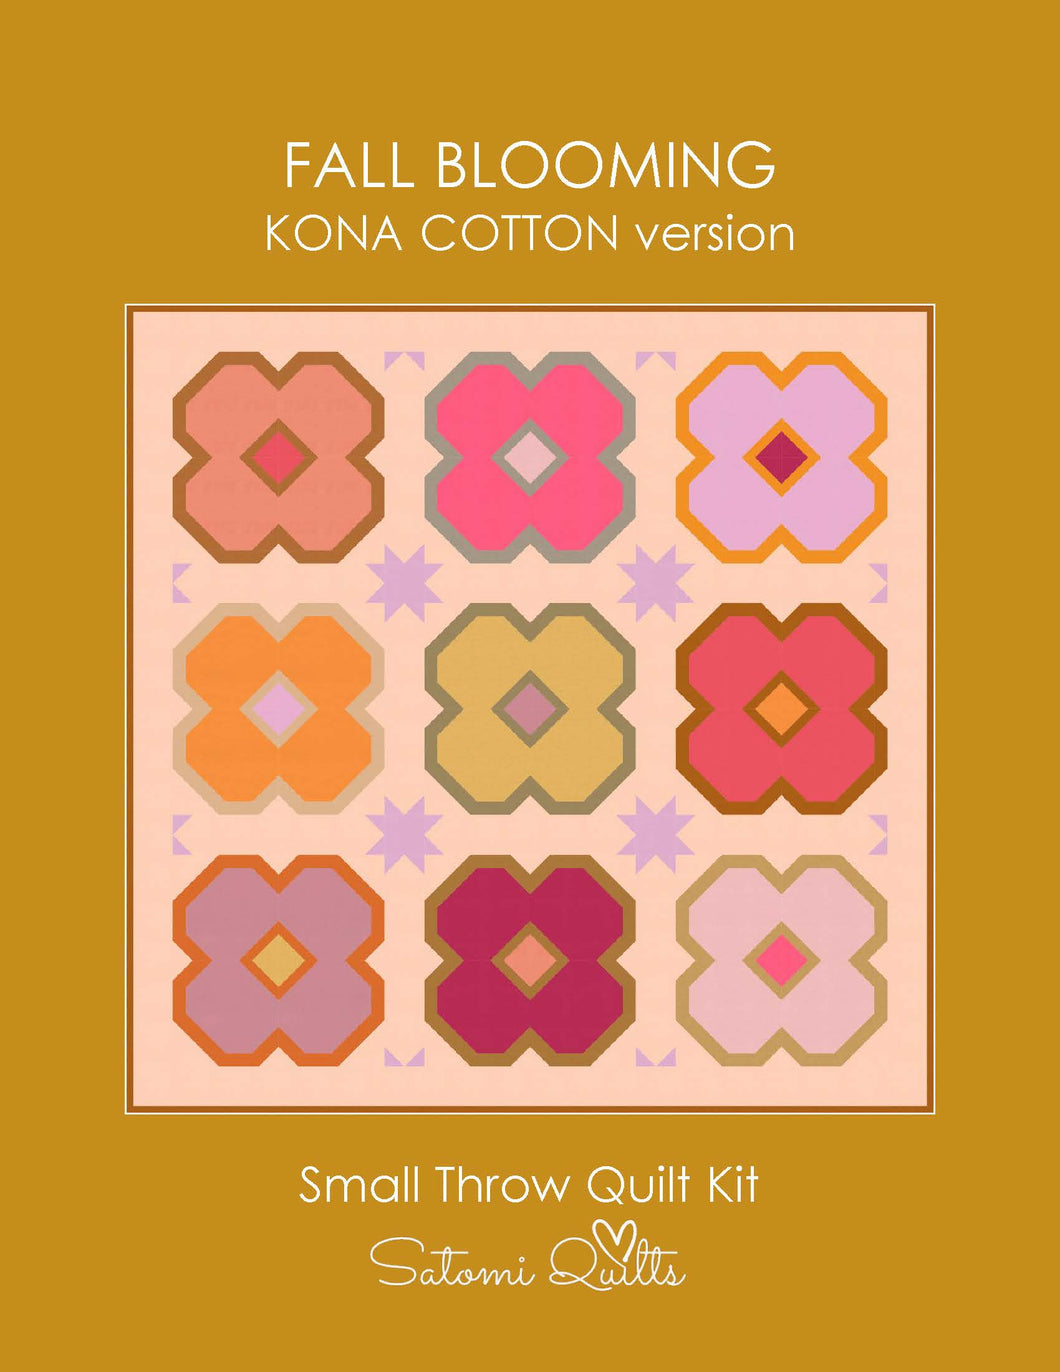 FALL BLOOMING (KONA COTTON) - Small Throw Quilt Kit